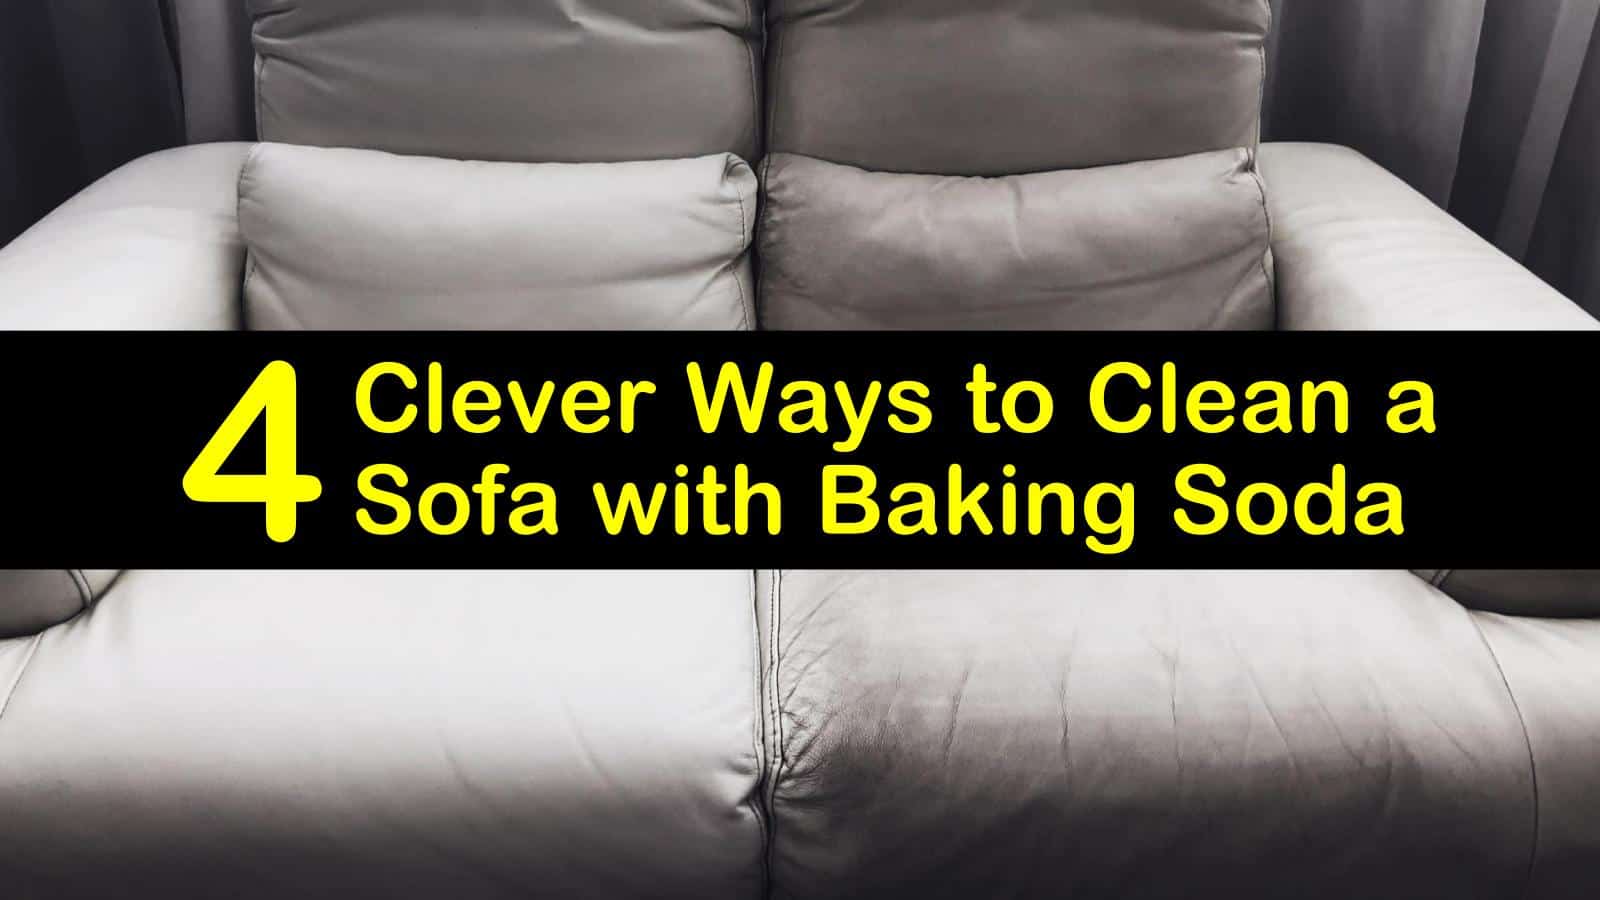 how to clean a sofa with baking soda titleimg1